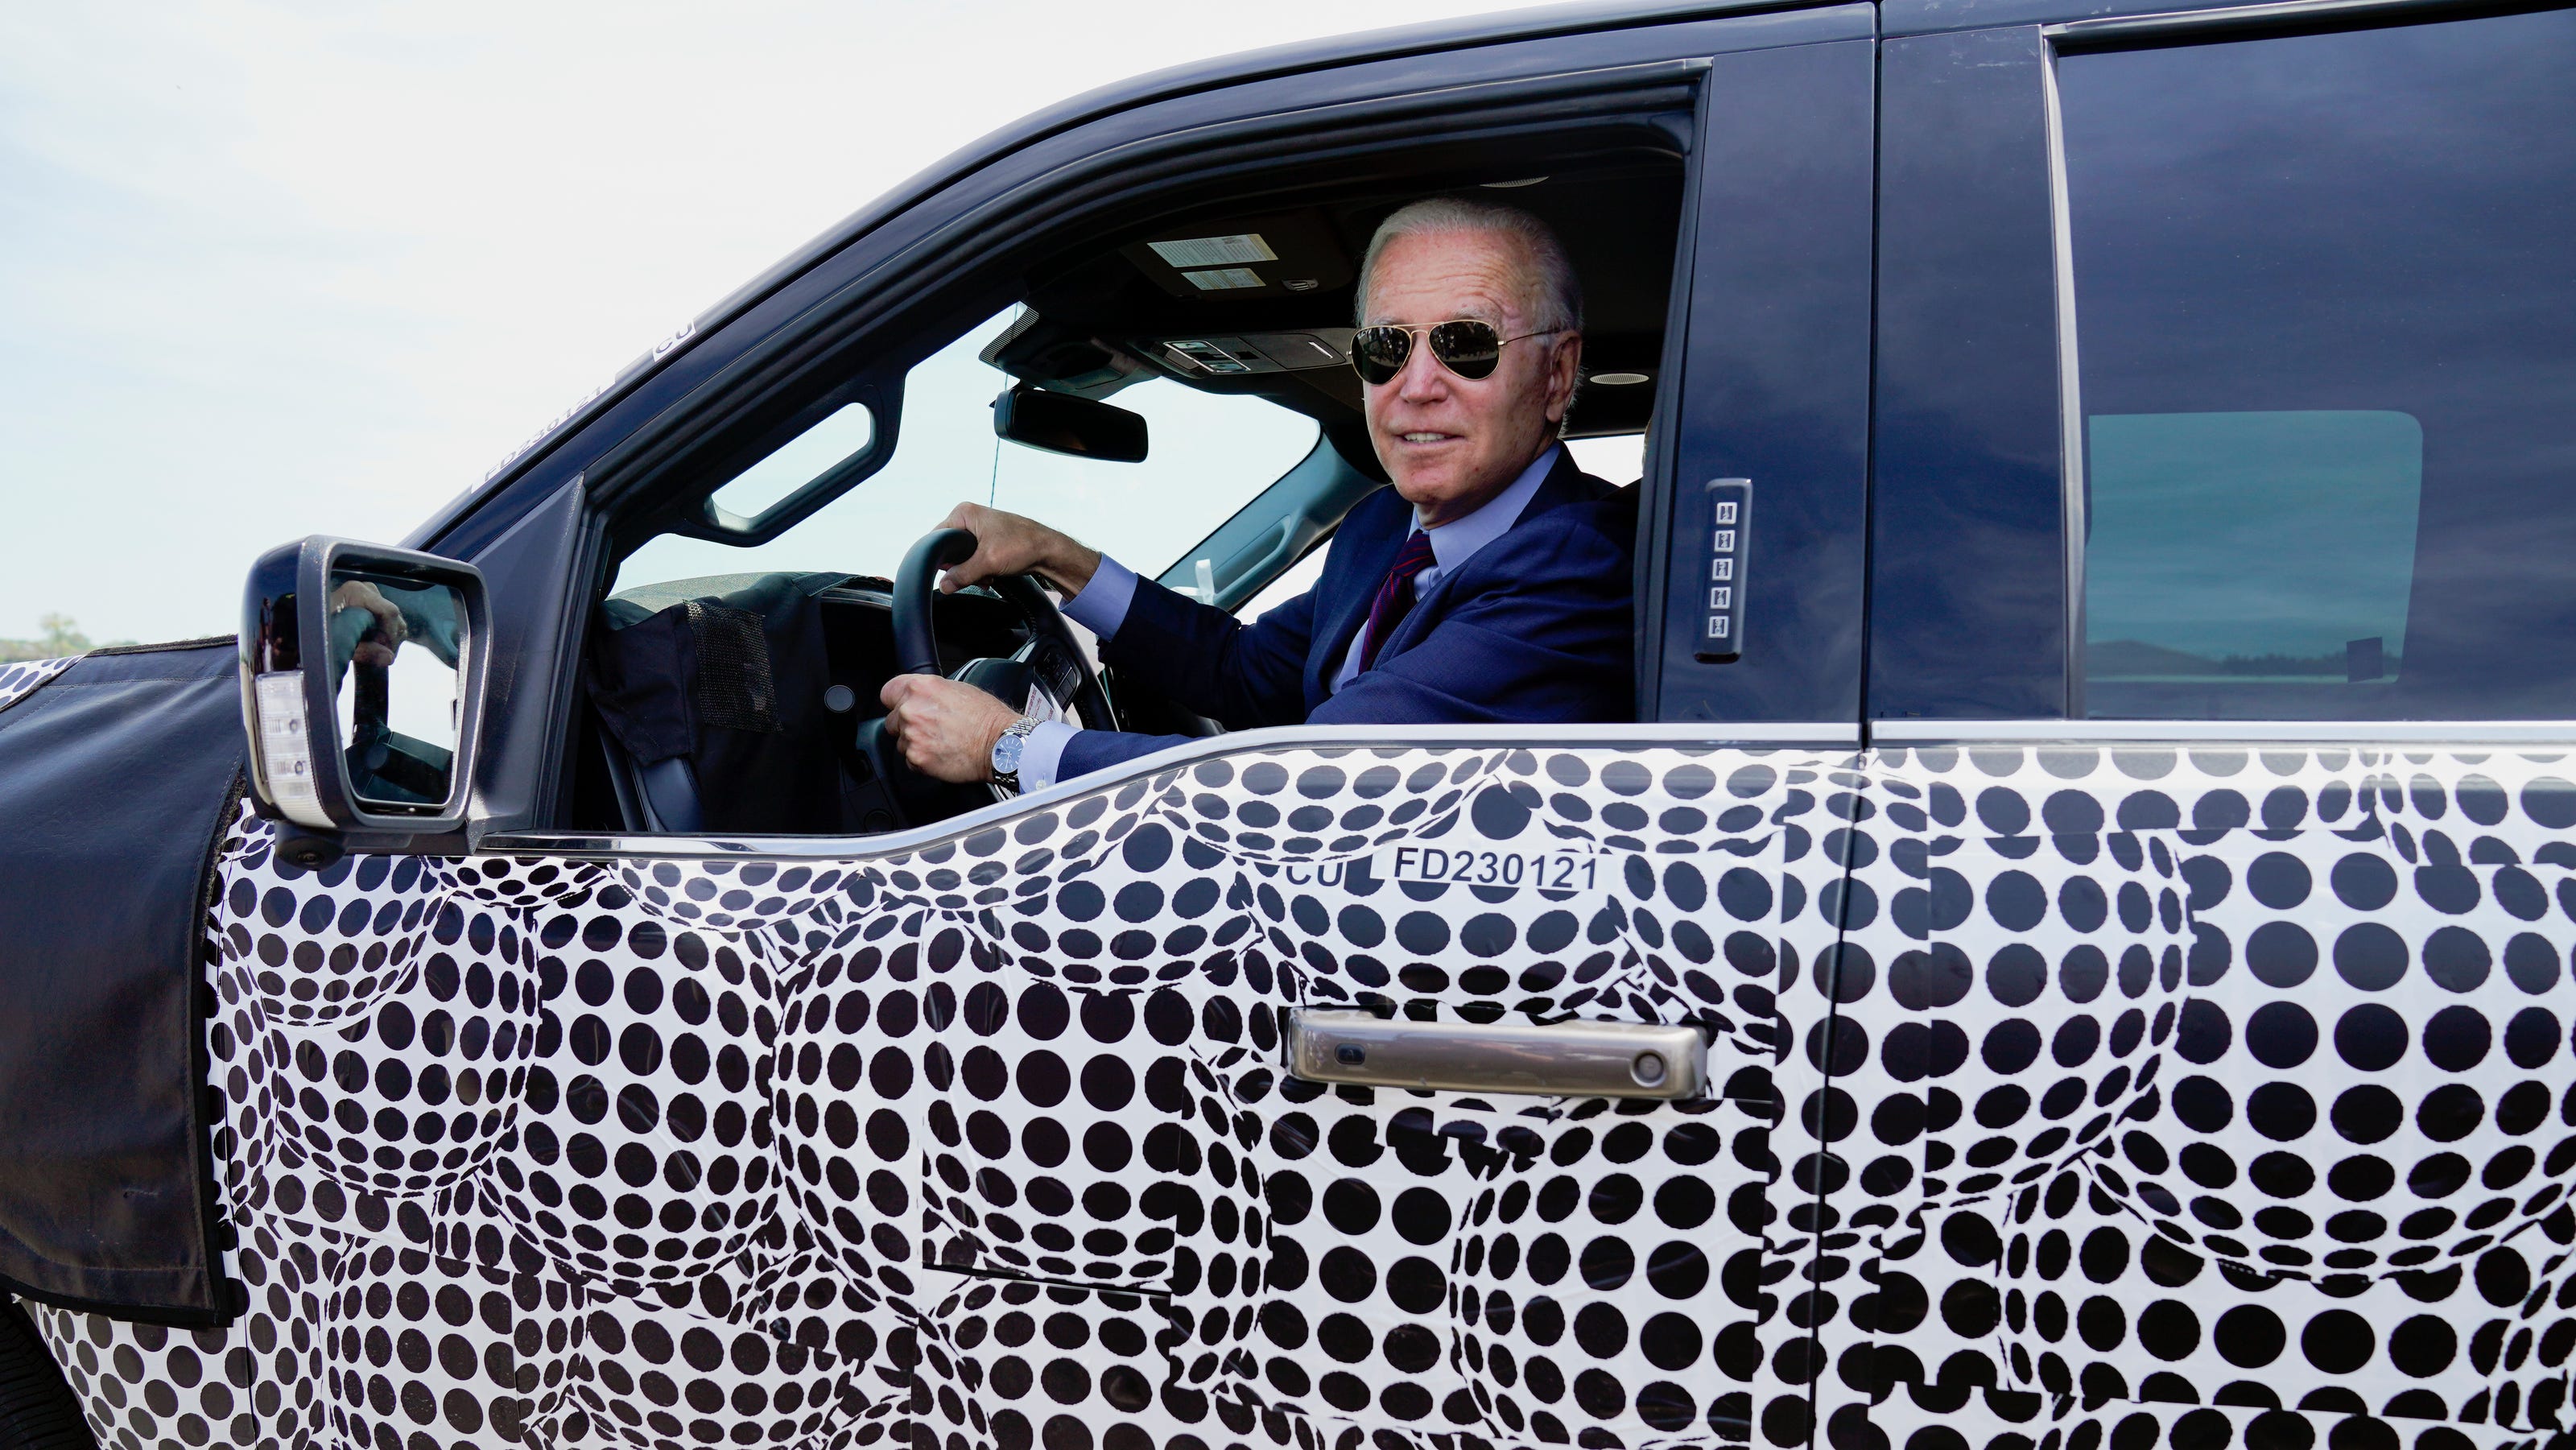 Fact check Biden drove Ford's new F150 electric truck